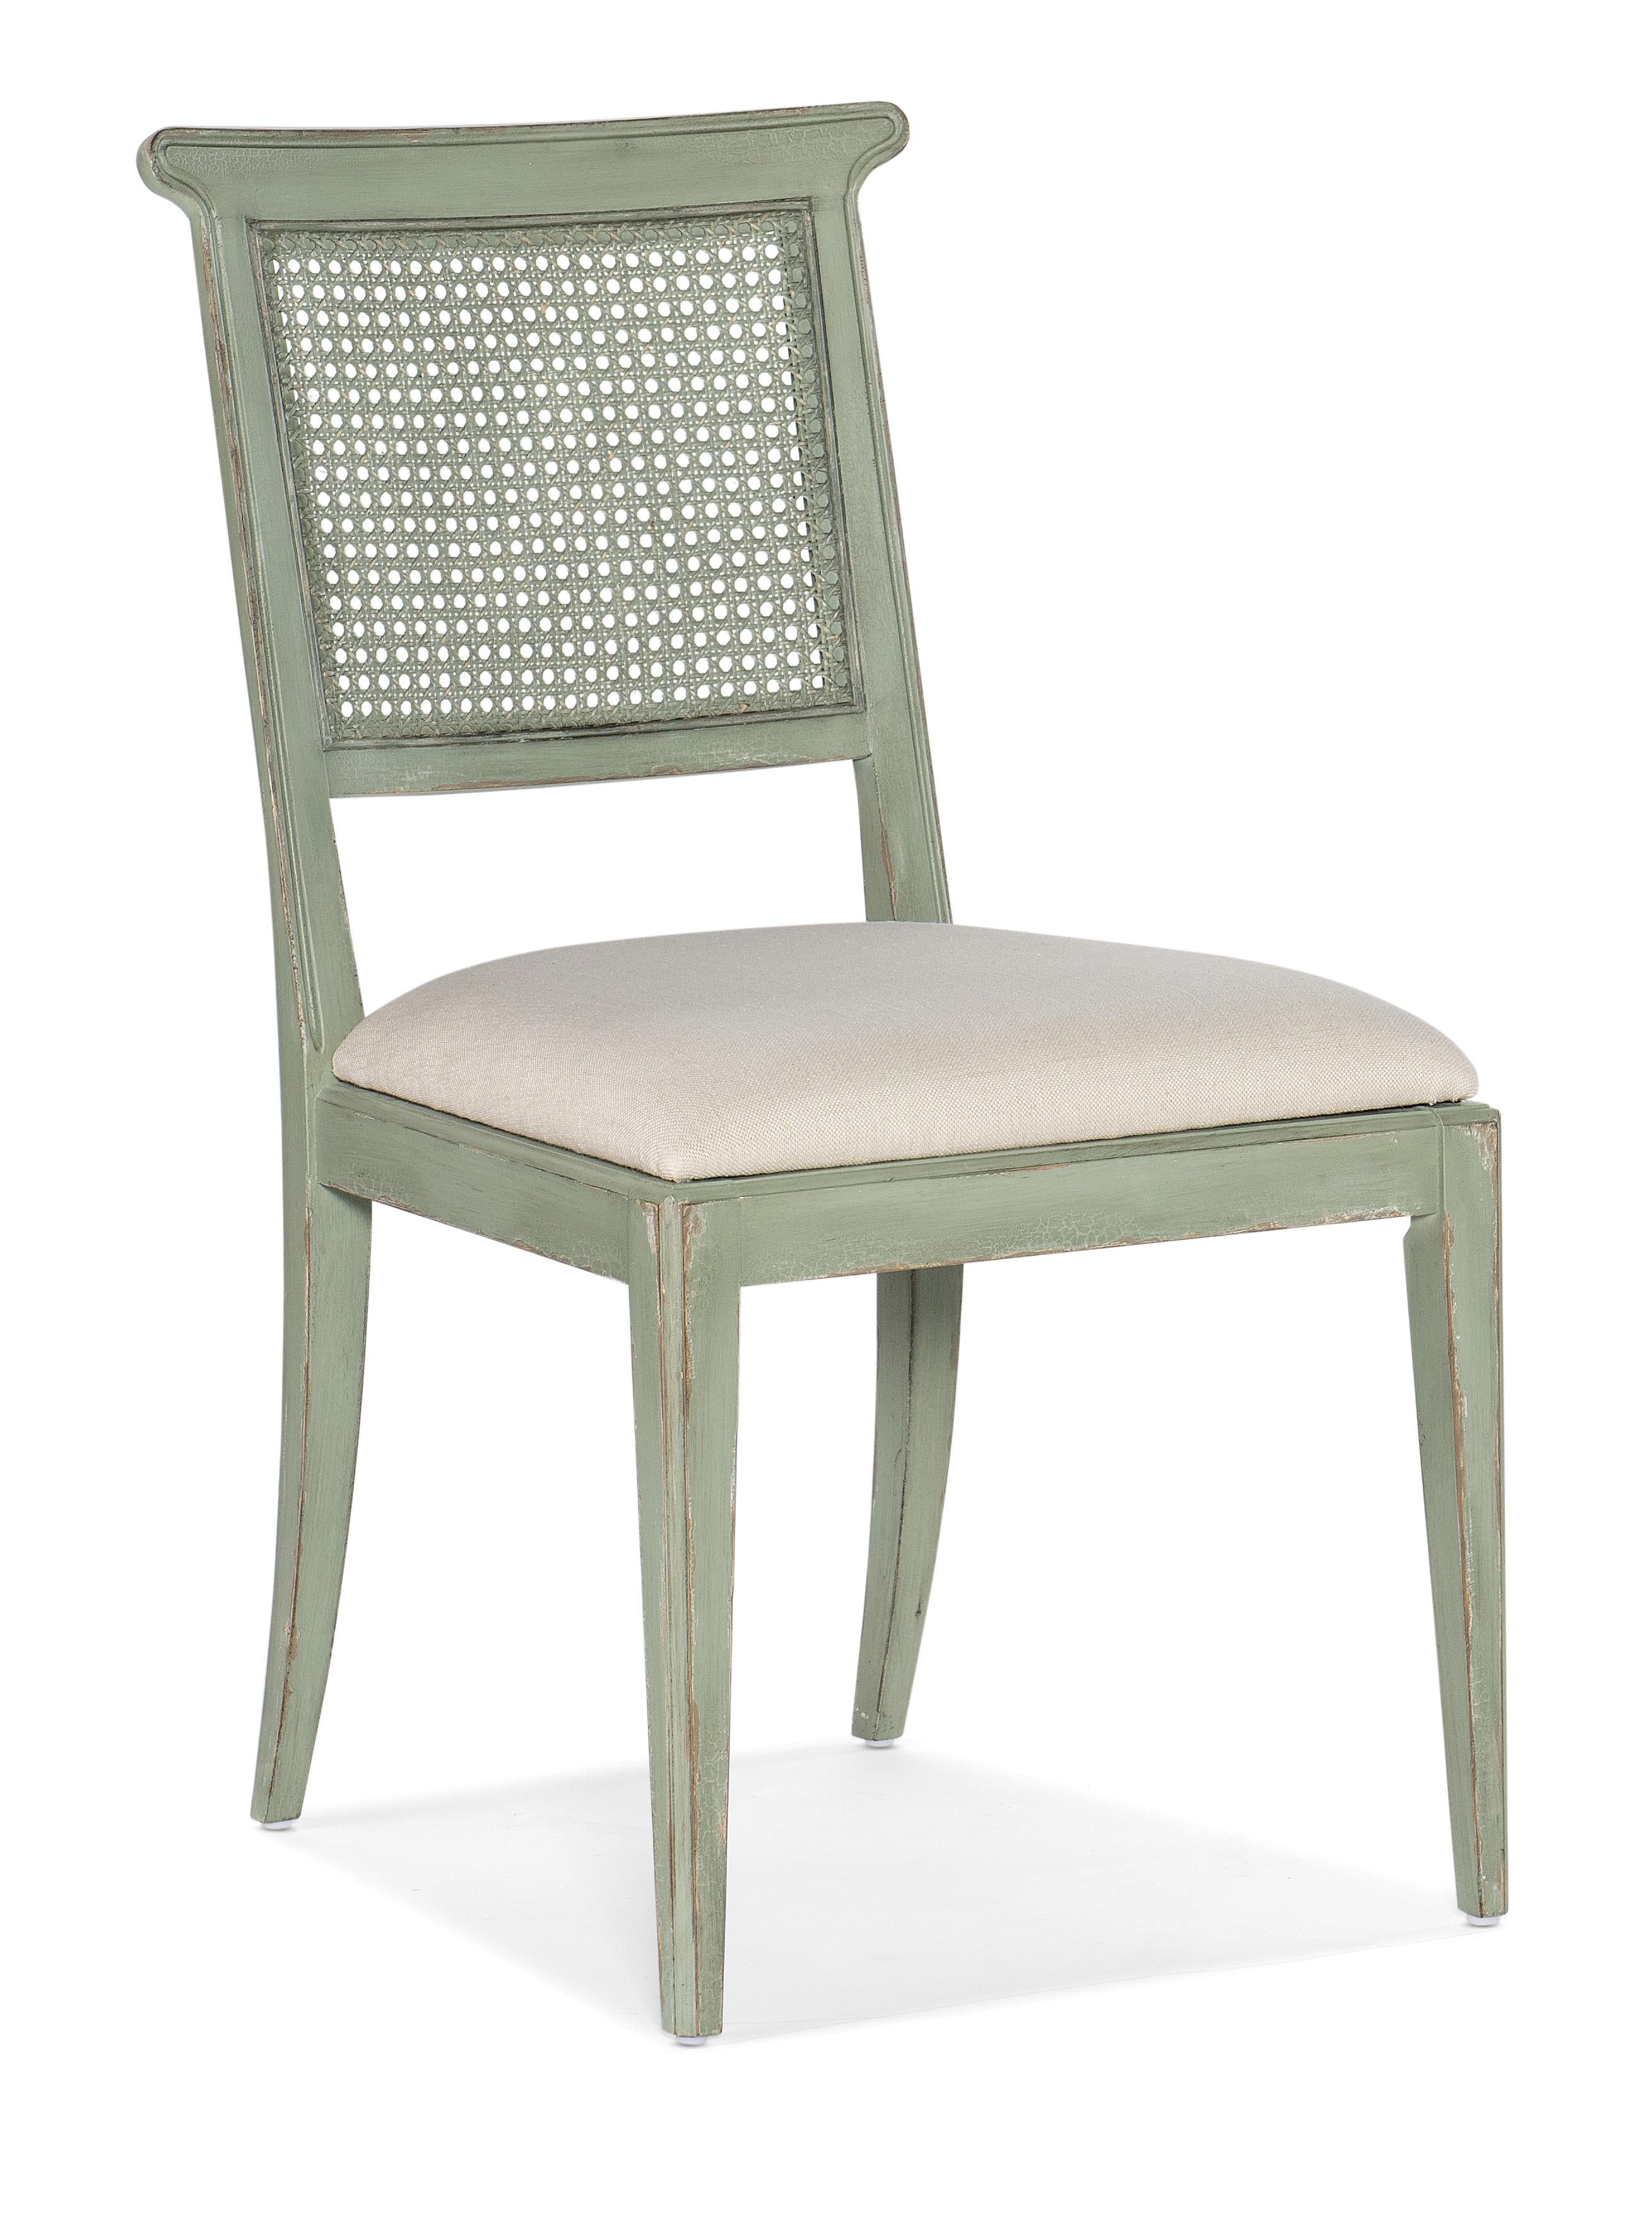 Charleston Upholstered Seat Side Chair-2 per carton/price ea - 6750-75410-32